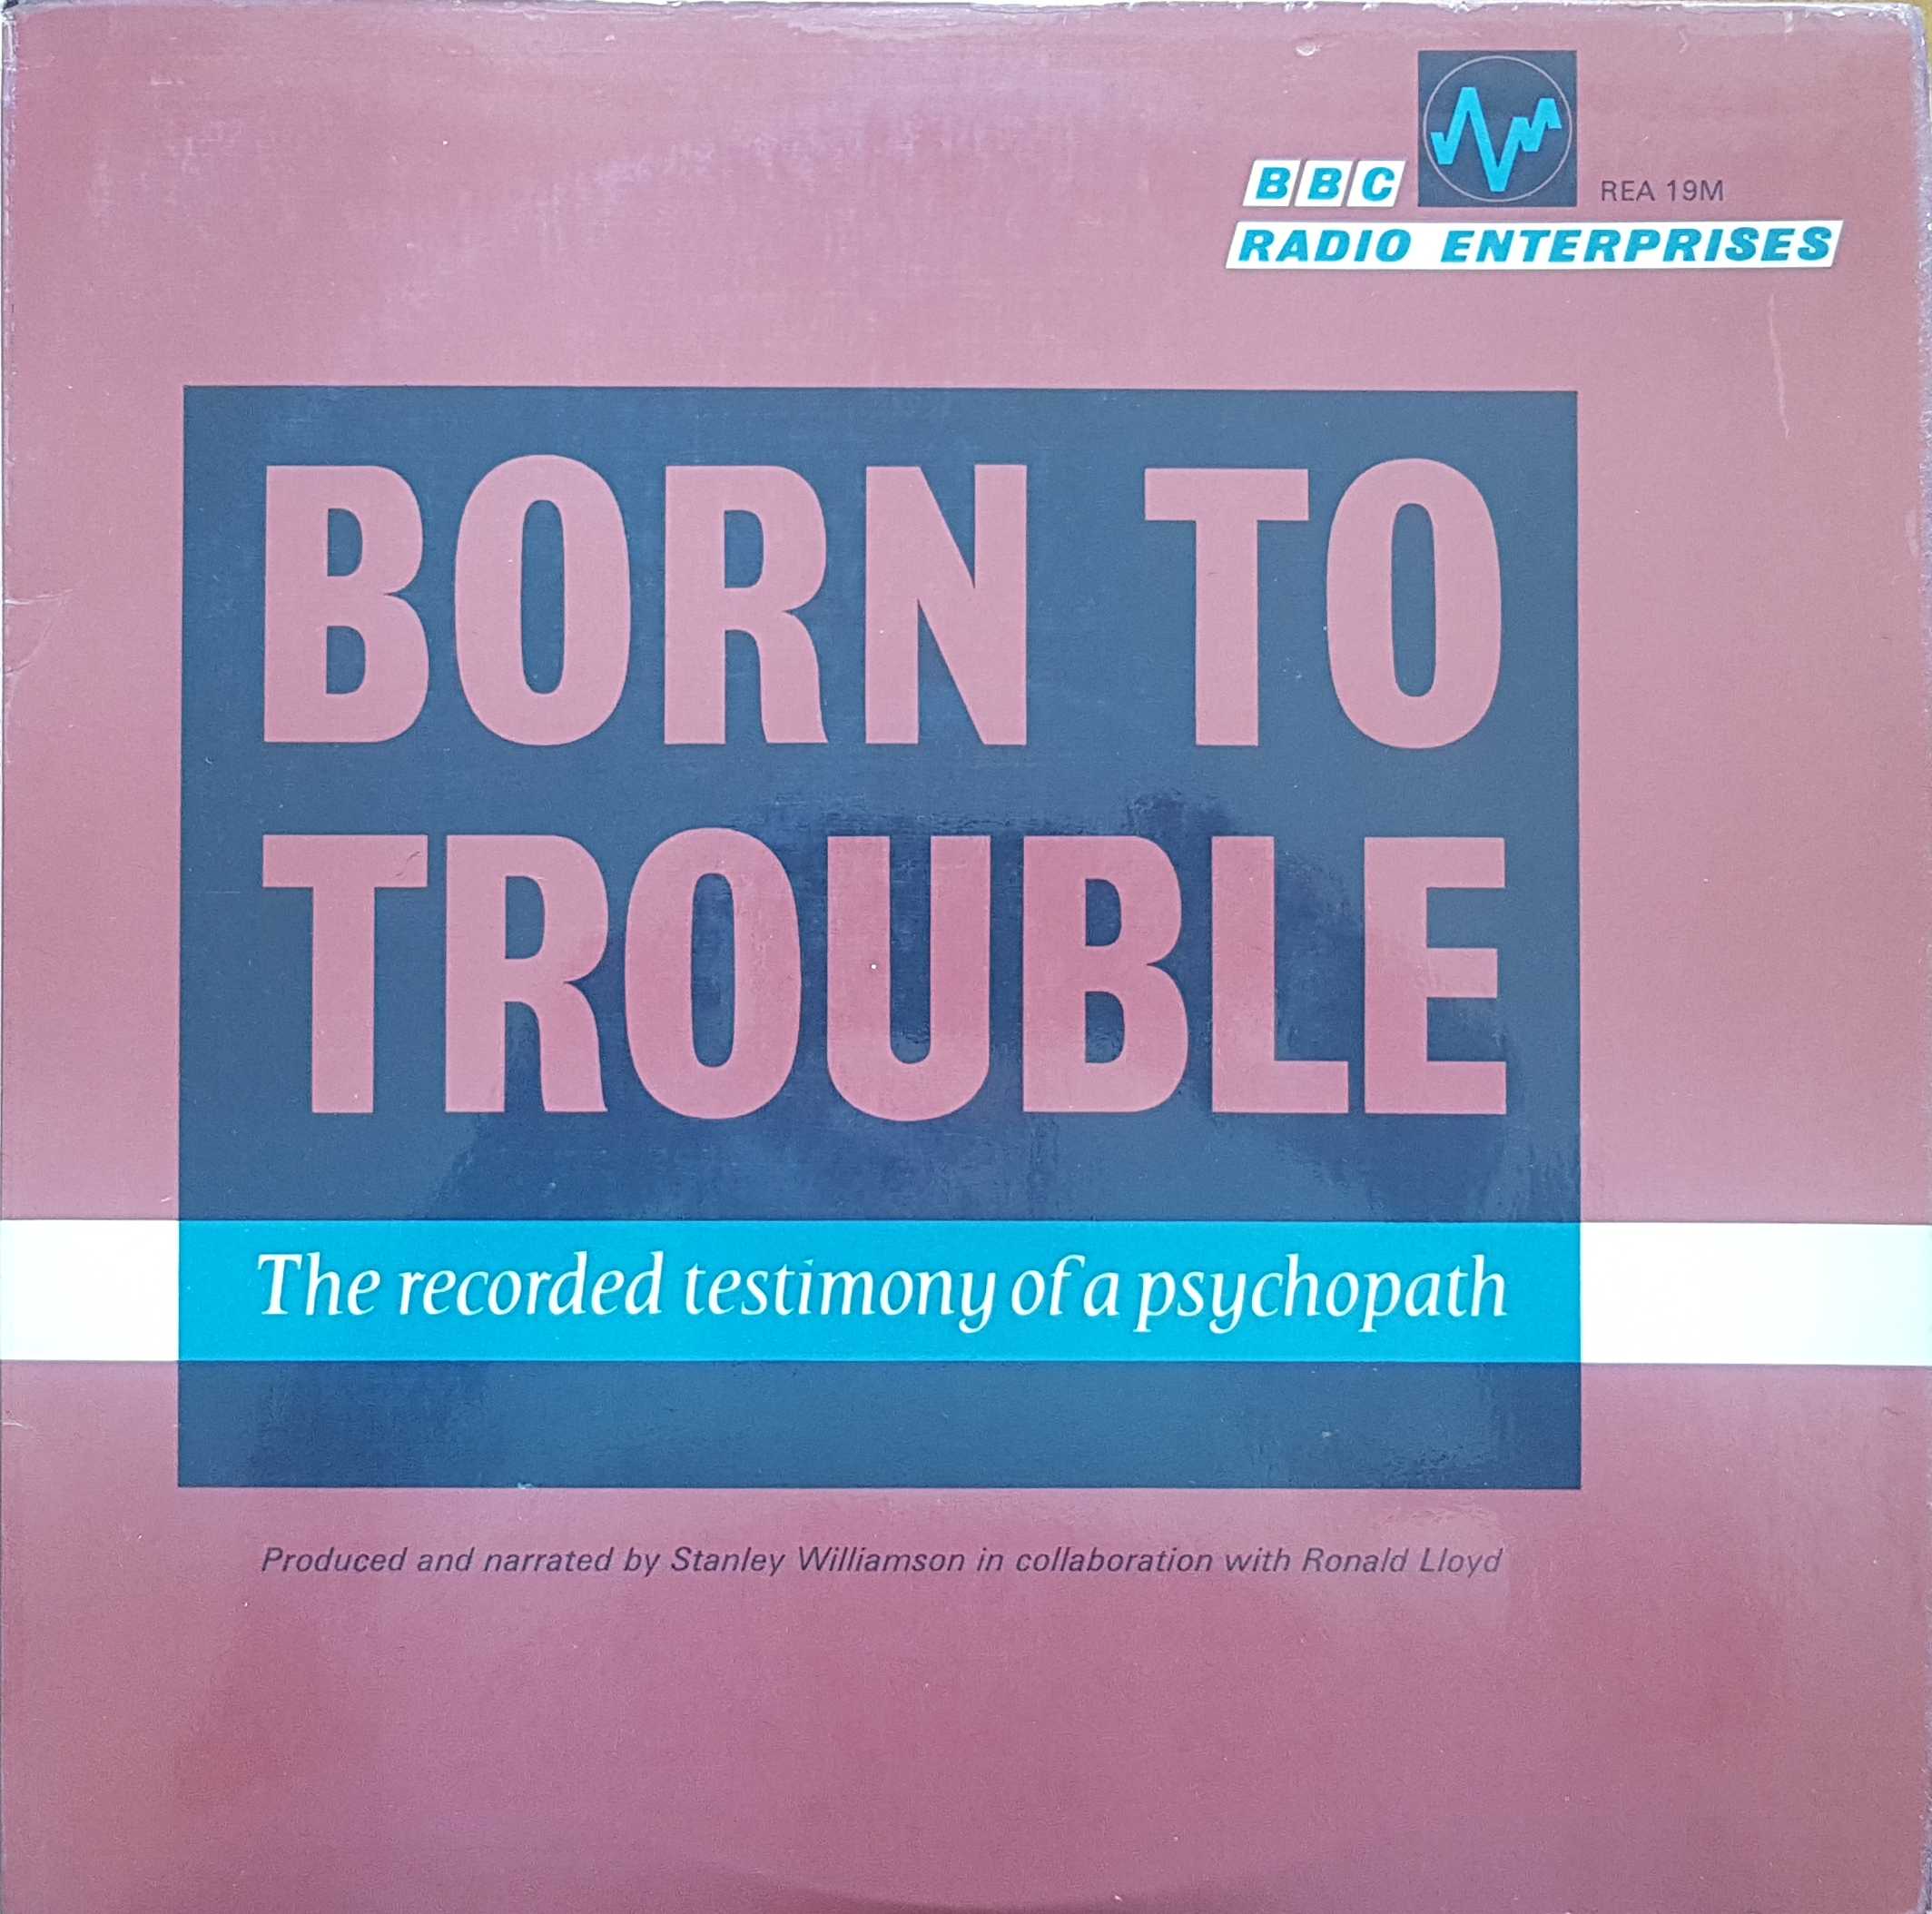 Picture of REA 19 Born to trouble: The recorded testimony of a psychopath by artist Stanley Williamson / Ronald Lloyd from the BBC albums - Records and Tapes library